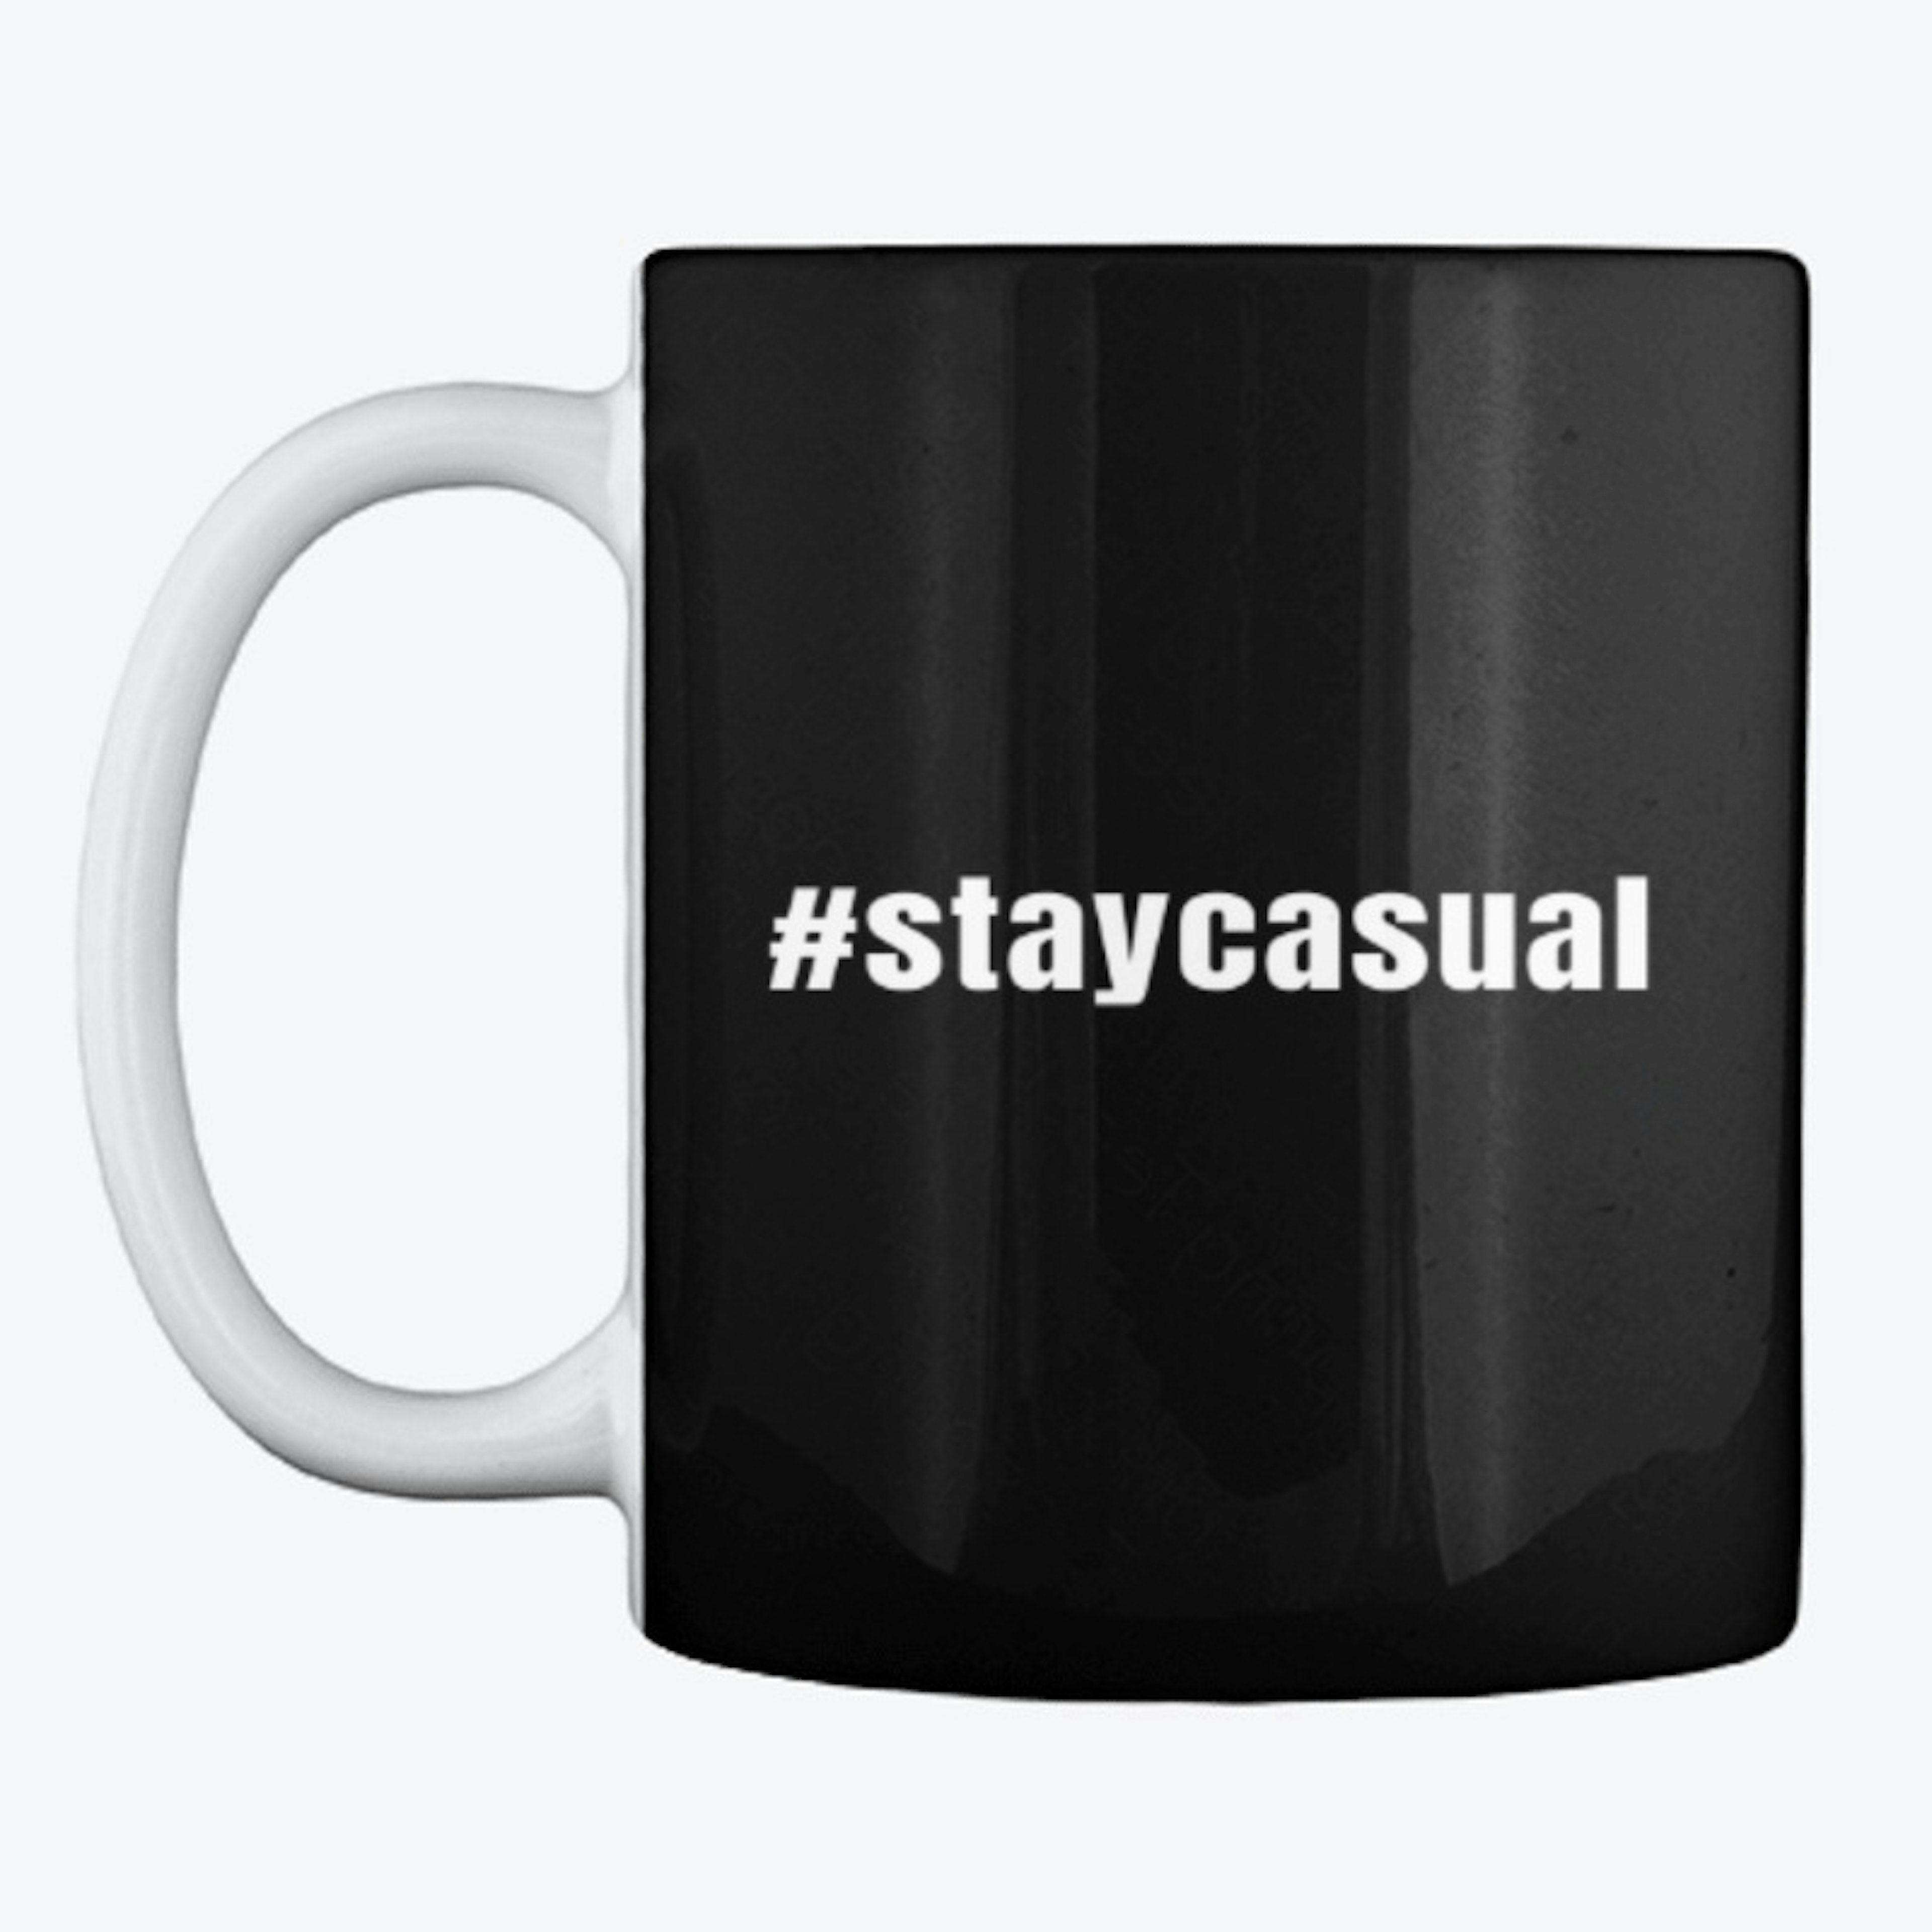 #staycasual